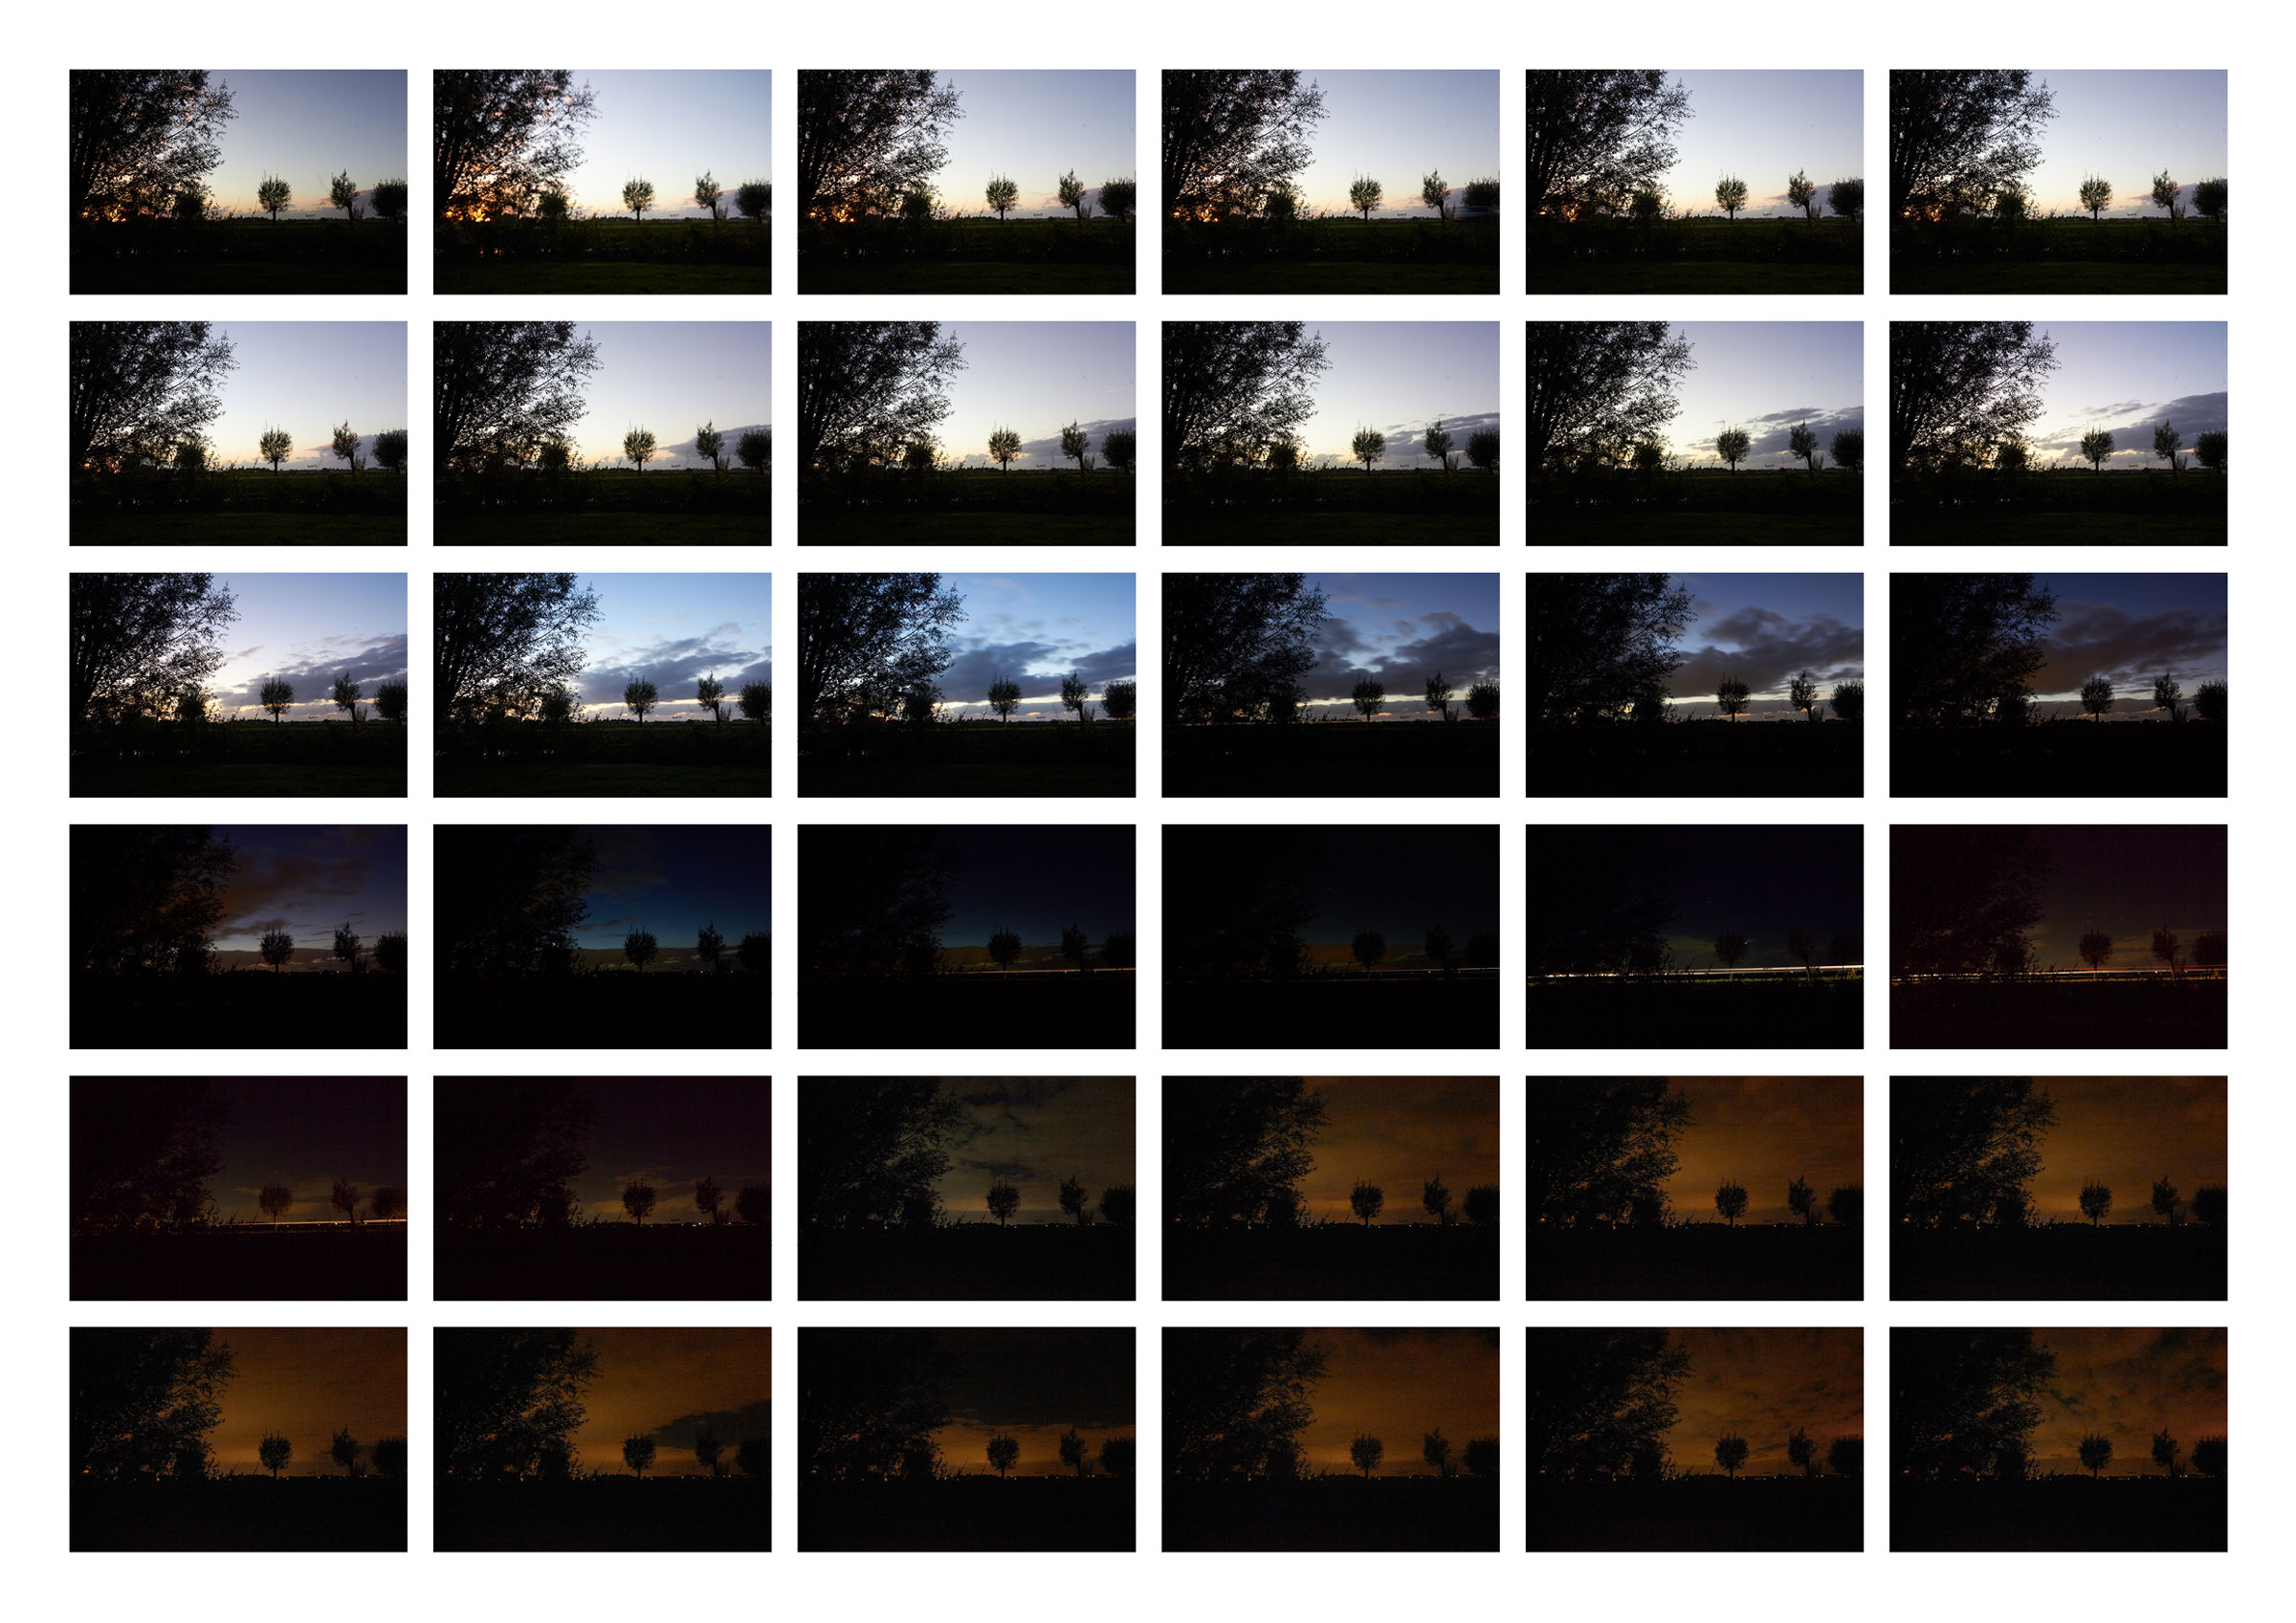 From Dusk till Glow, Time-lapse sequence